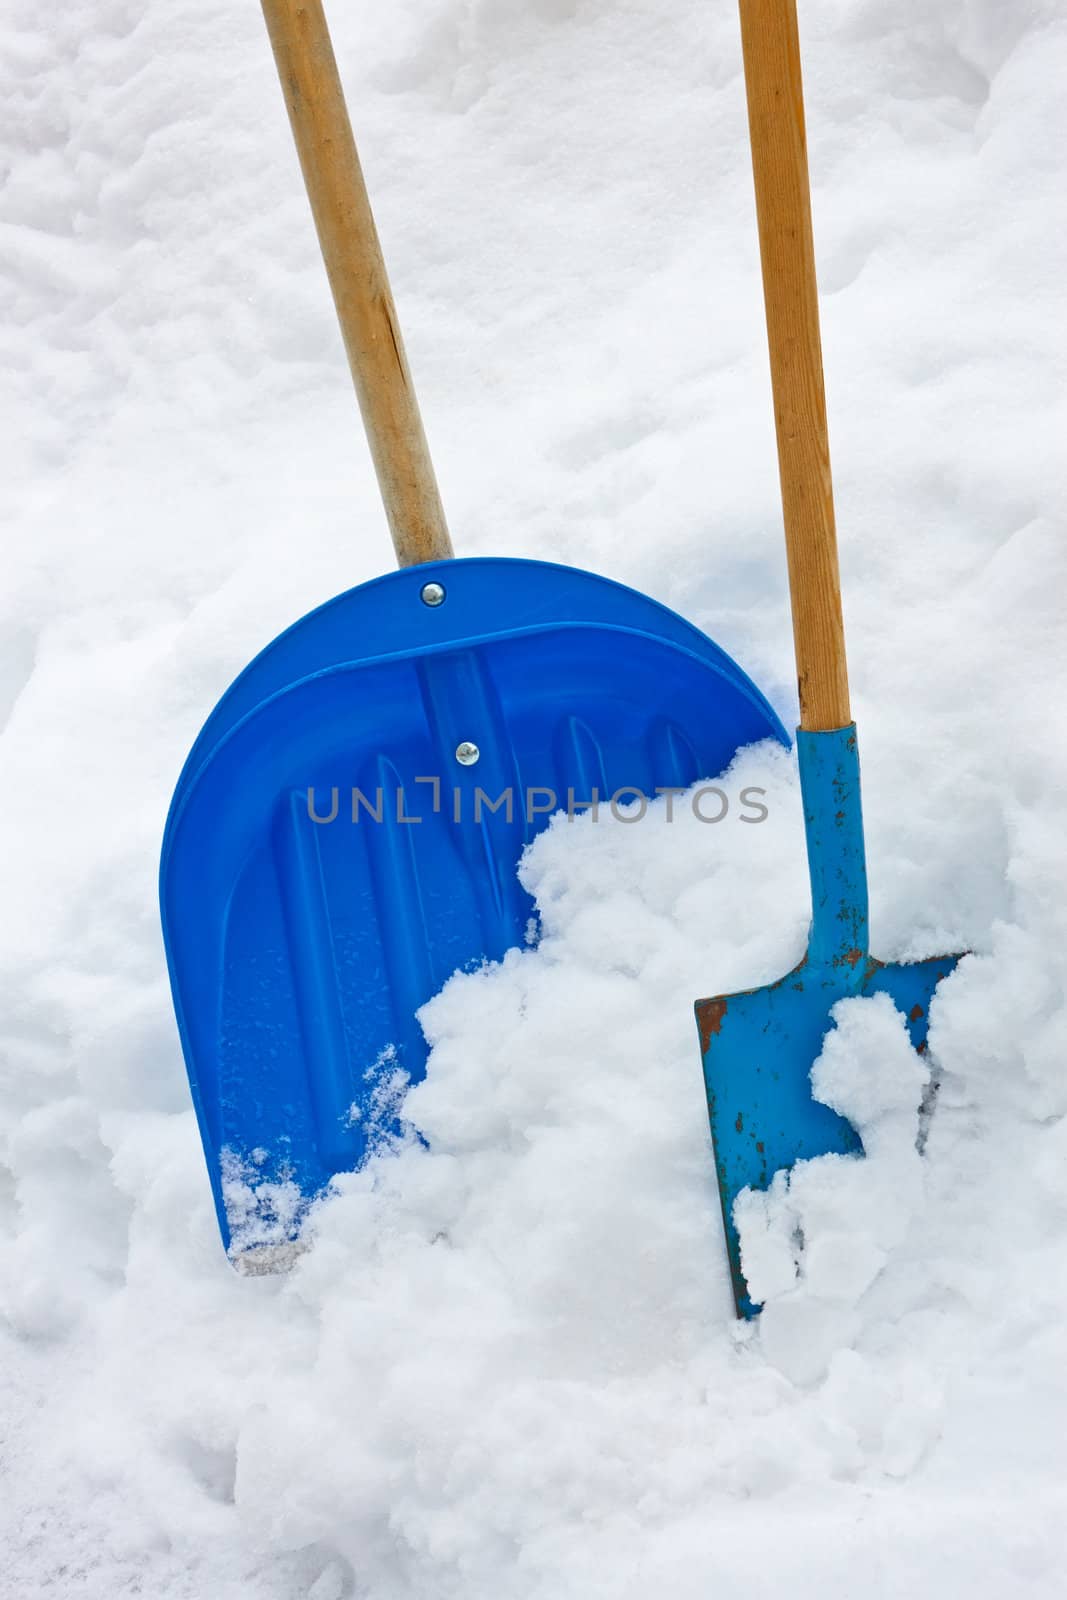 Two Shovels In The Snow Heap by qiiip